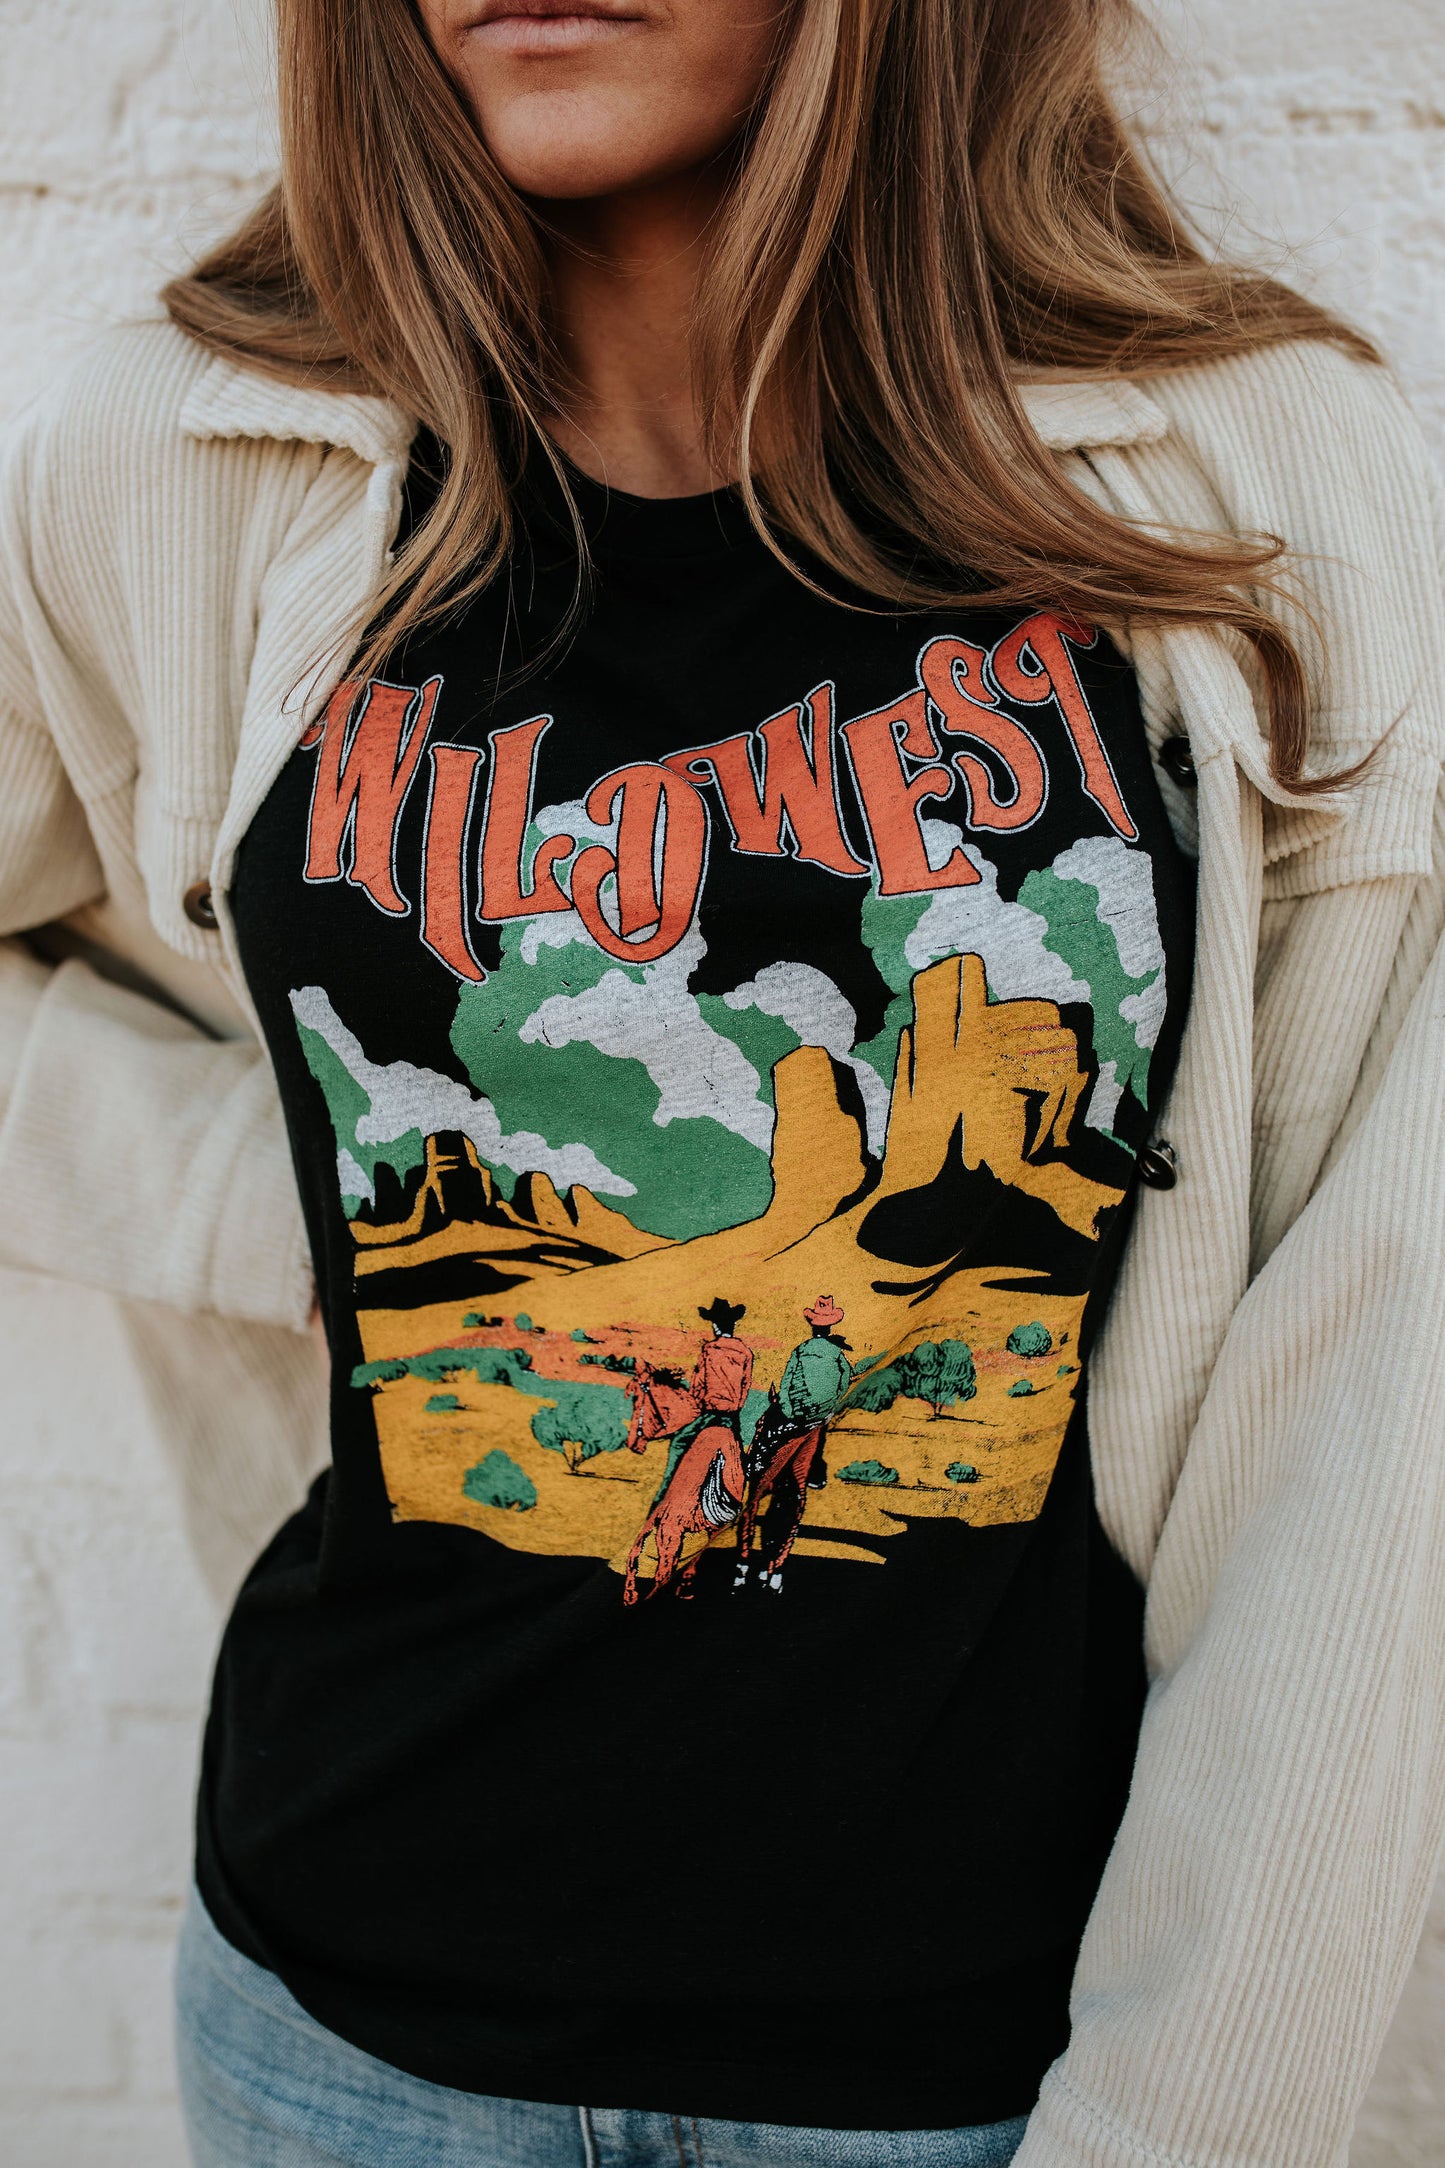 THE WILD WEST GRAPHIC TEE IN BLACK